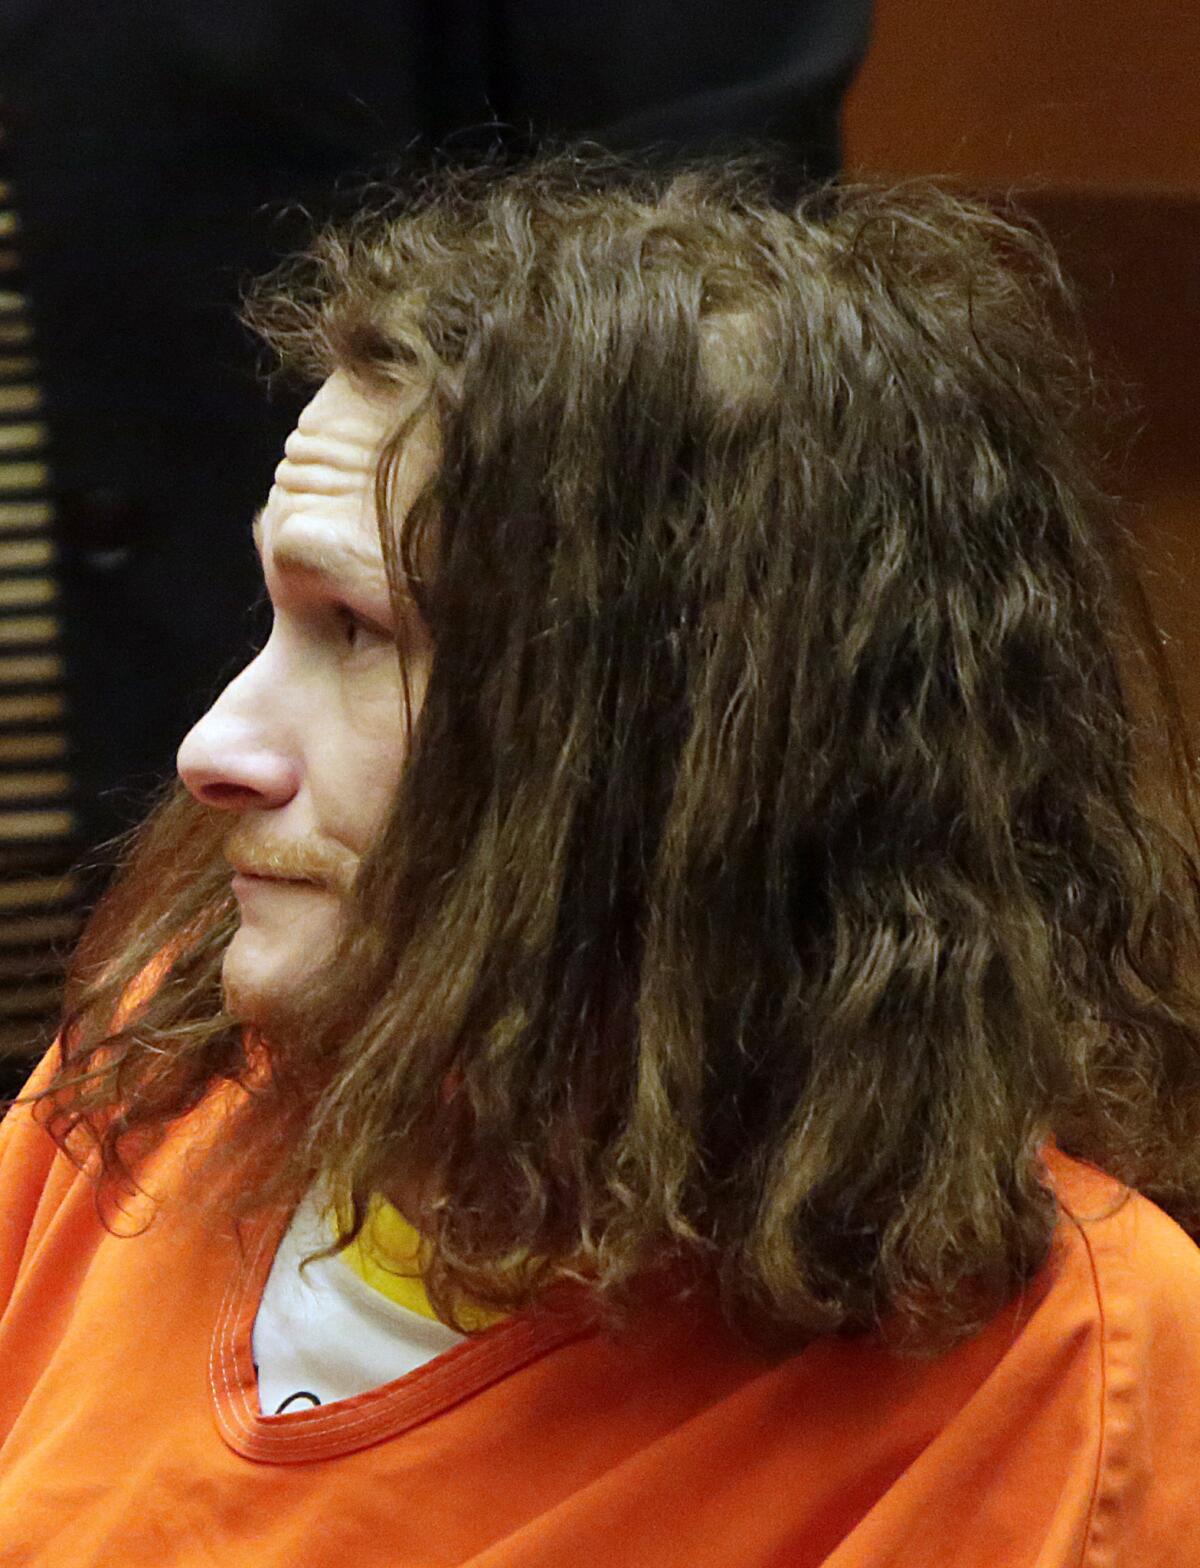 Jason Joel Wolstone, shown in court in October 2013, pleaded guilty to assault likely to produce great bodily harm in connection with the fatal stabbing of a Lynwood woman off Hollywood Boulevard and Highland Avenue four months earlier.